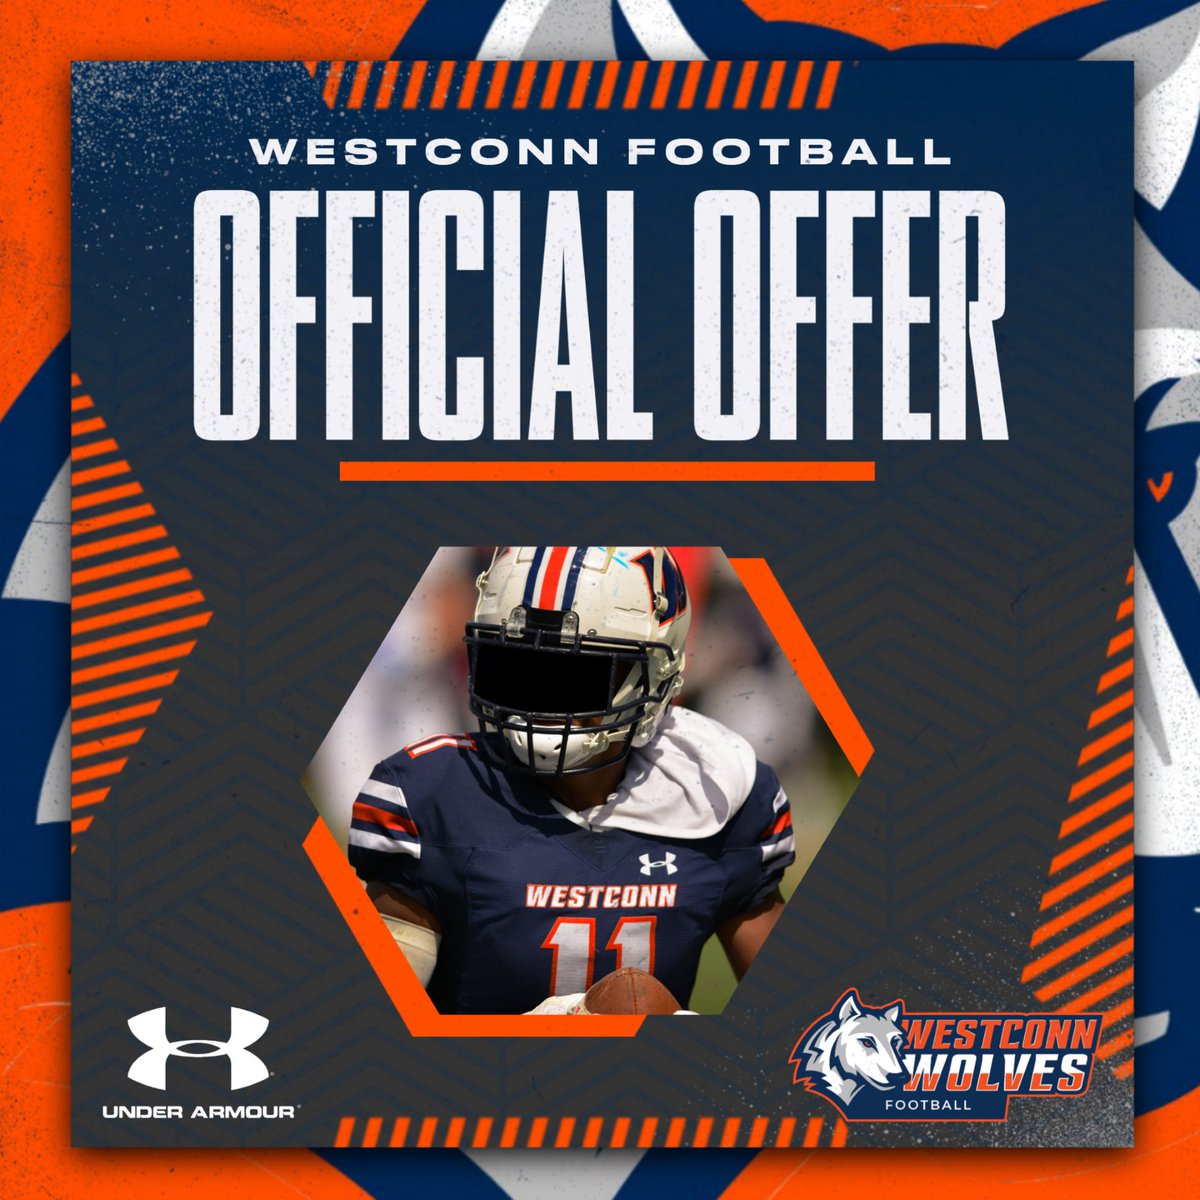 Got some great news today. Thank you @CoachLoth See you all soon! @WestConnFB @MustangFootball @CoachShack_ @CoachP_LRHS